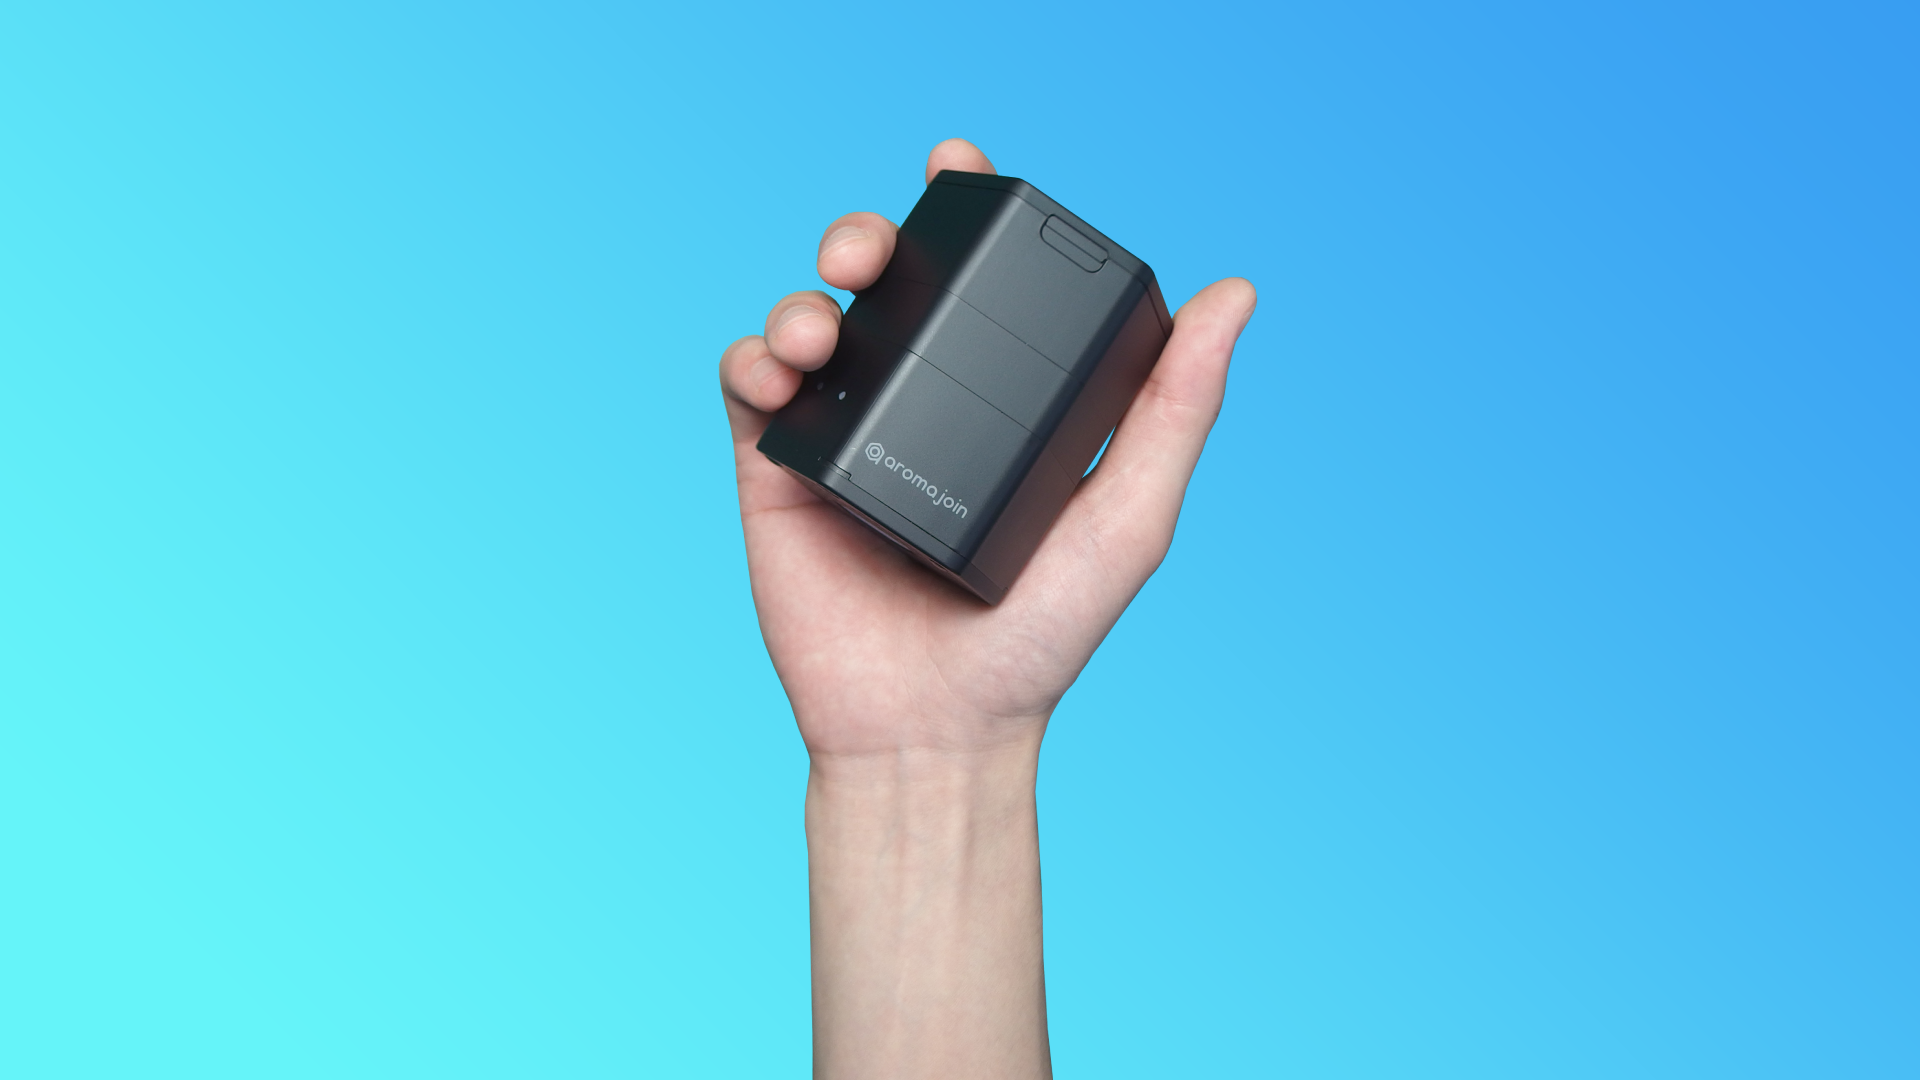 Aromajoin has unveiled a new device that allows you to feel smells in games